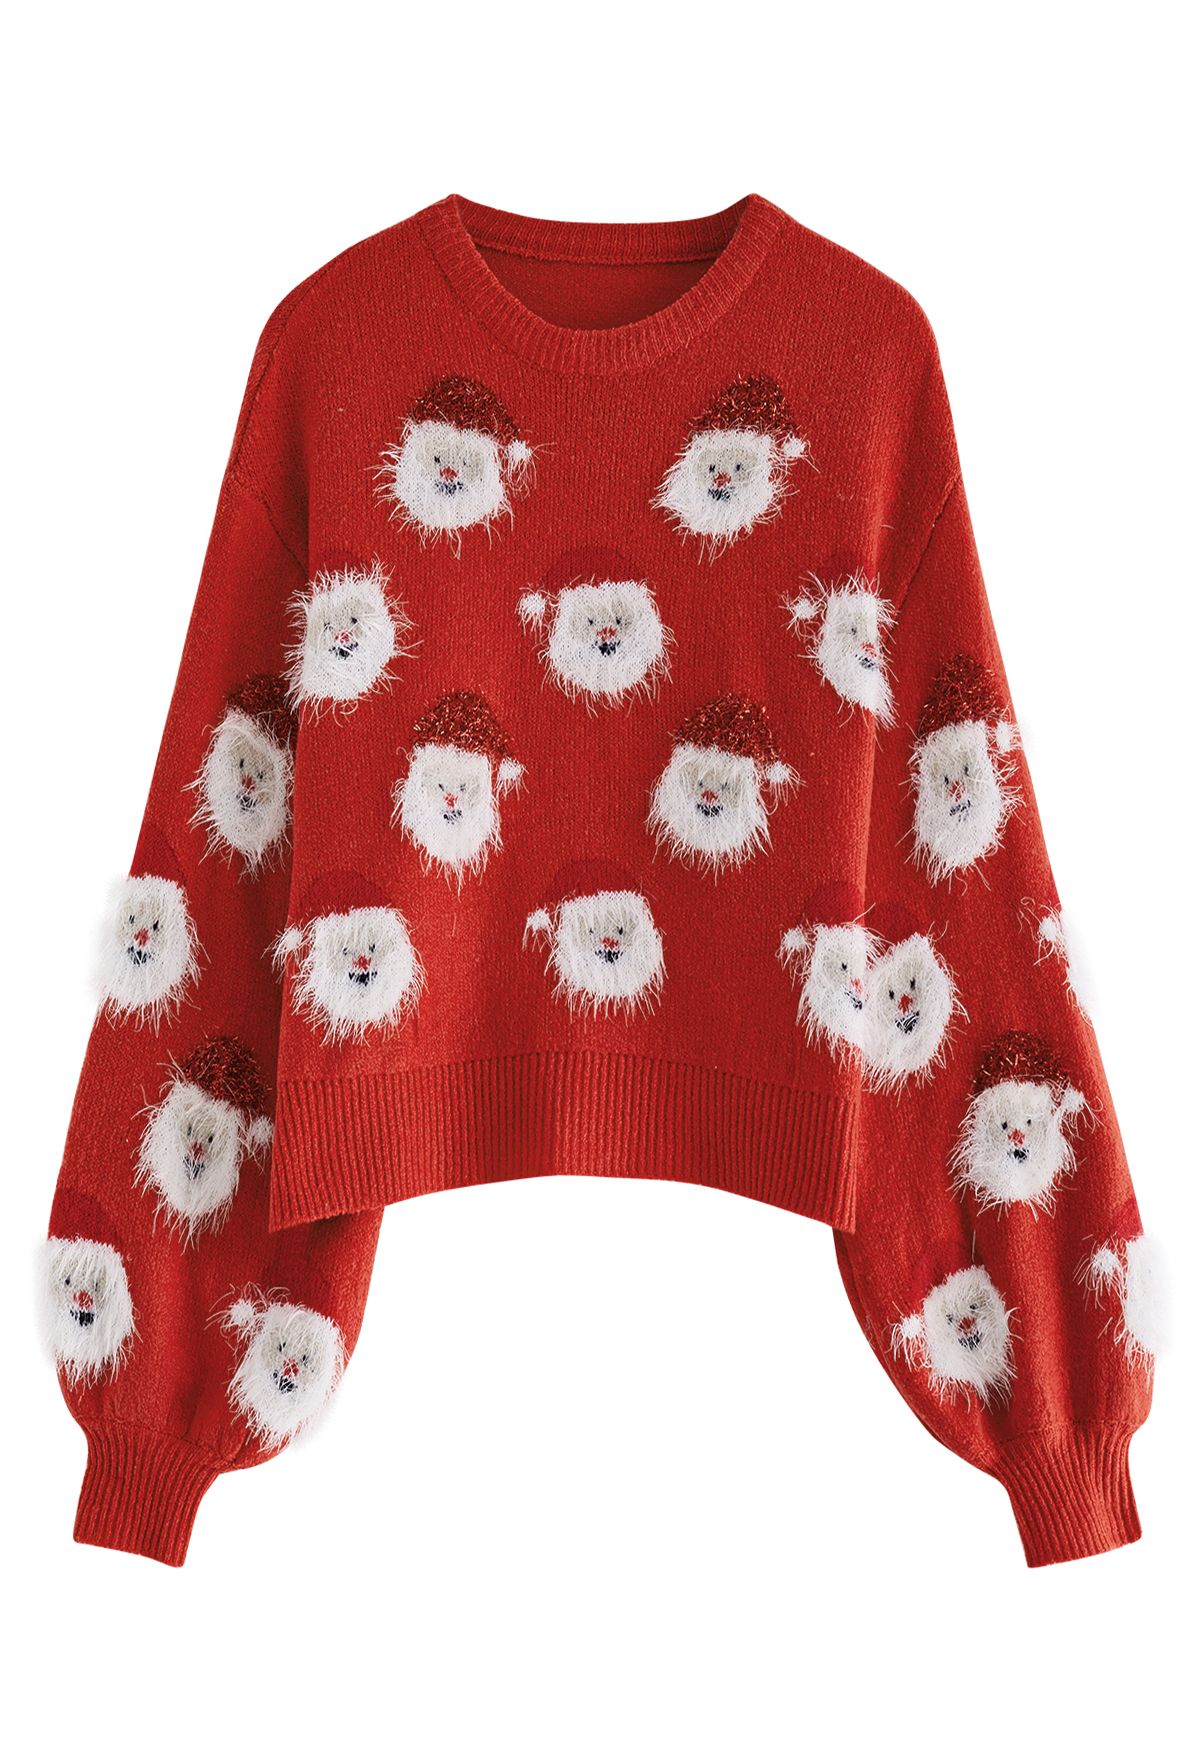 Fuzzy Santa Claus Knit Top in Red